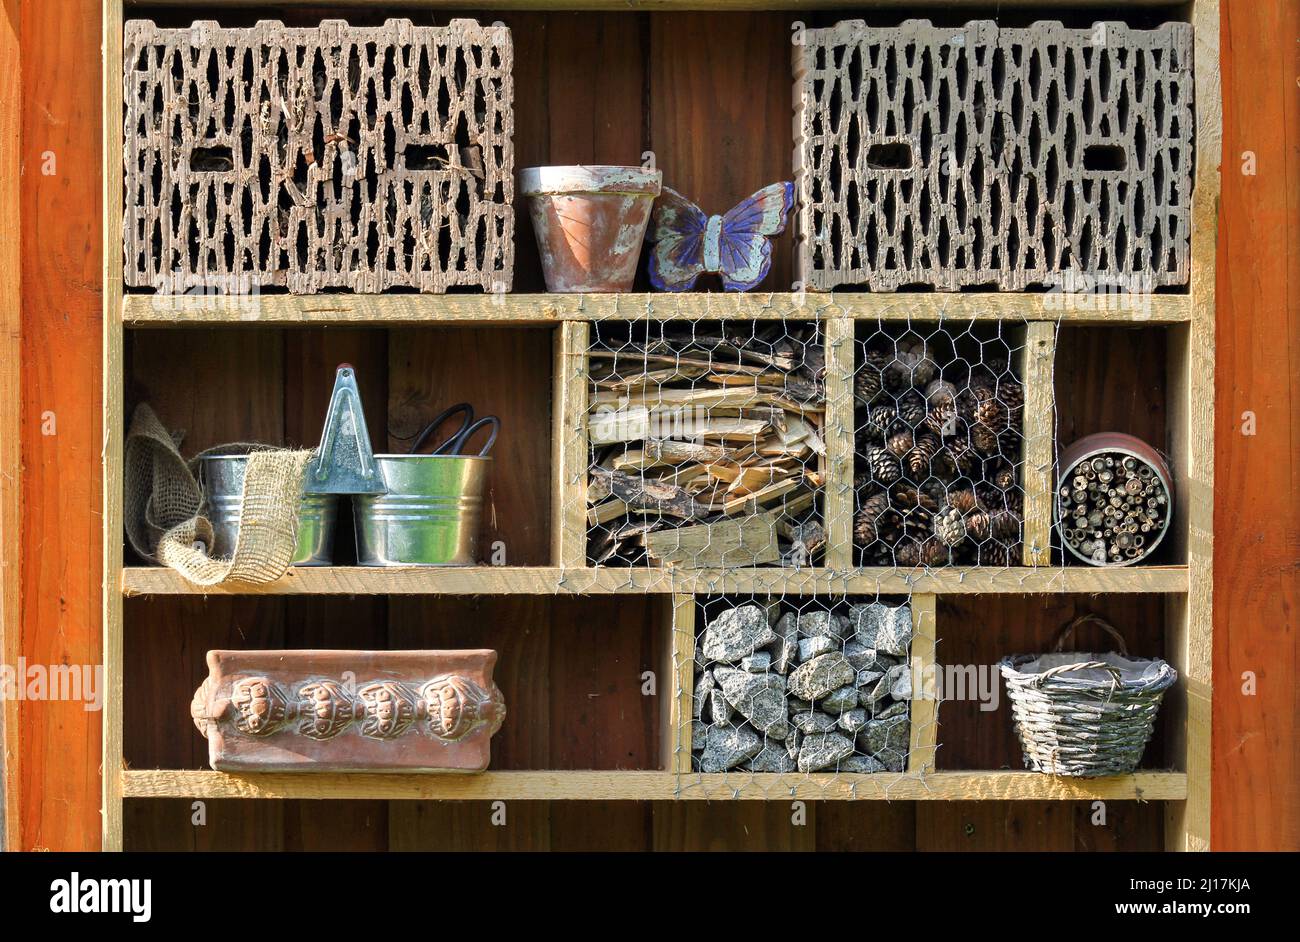 Shelf with insect hotel and garden utensils Stock Photo